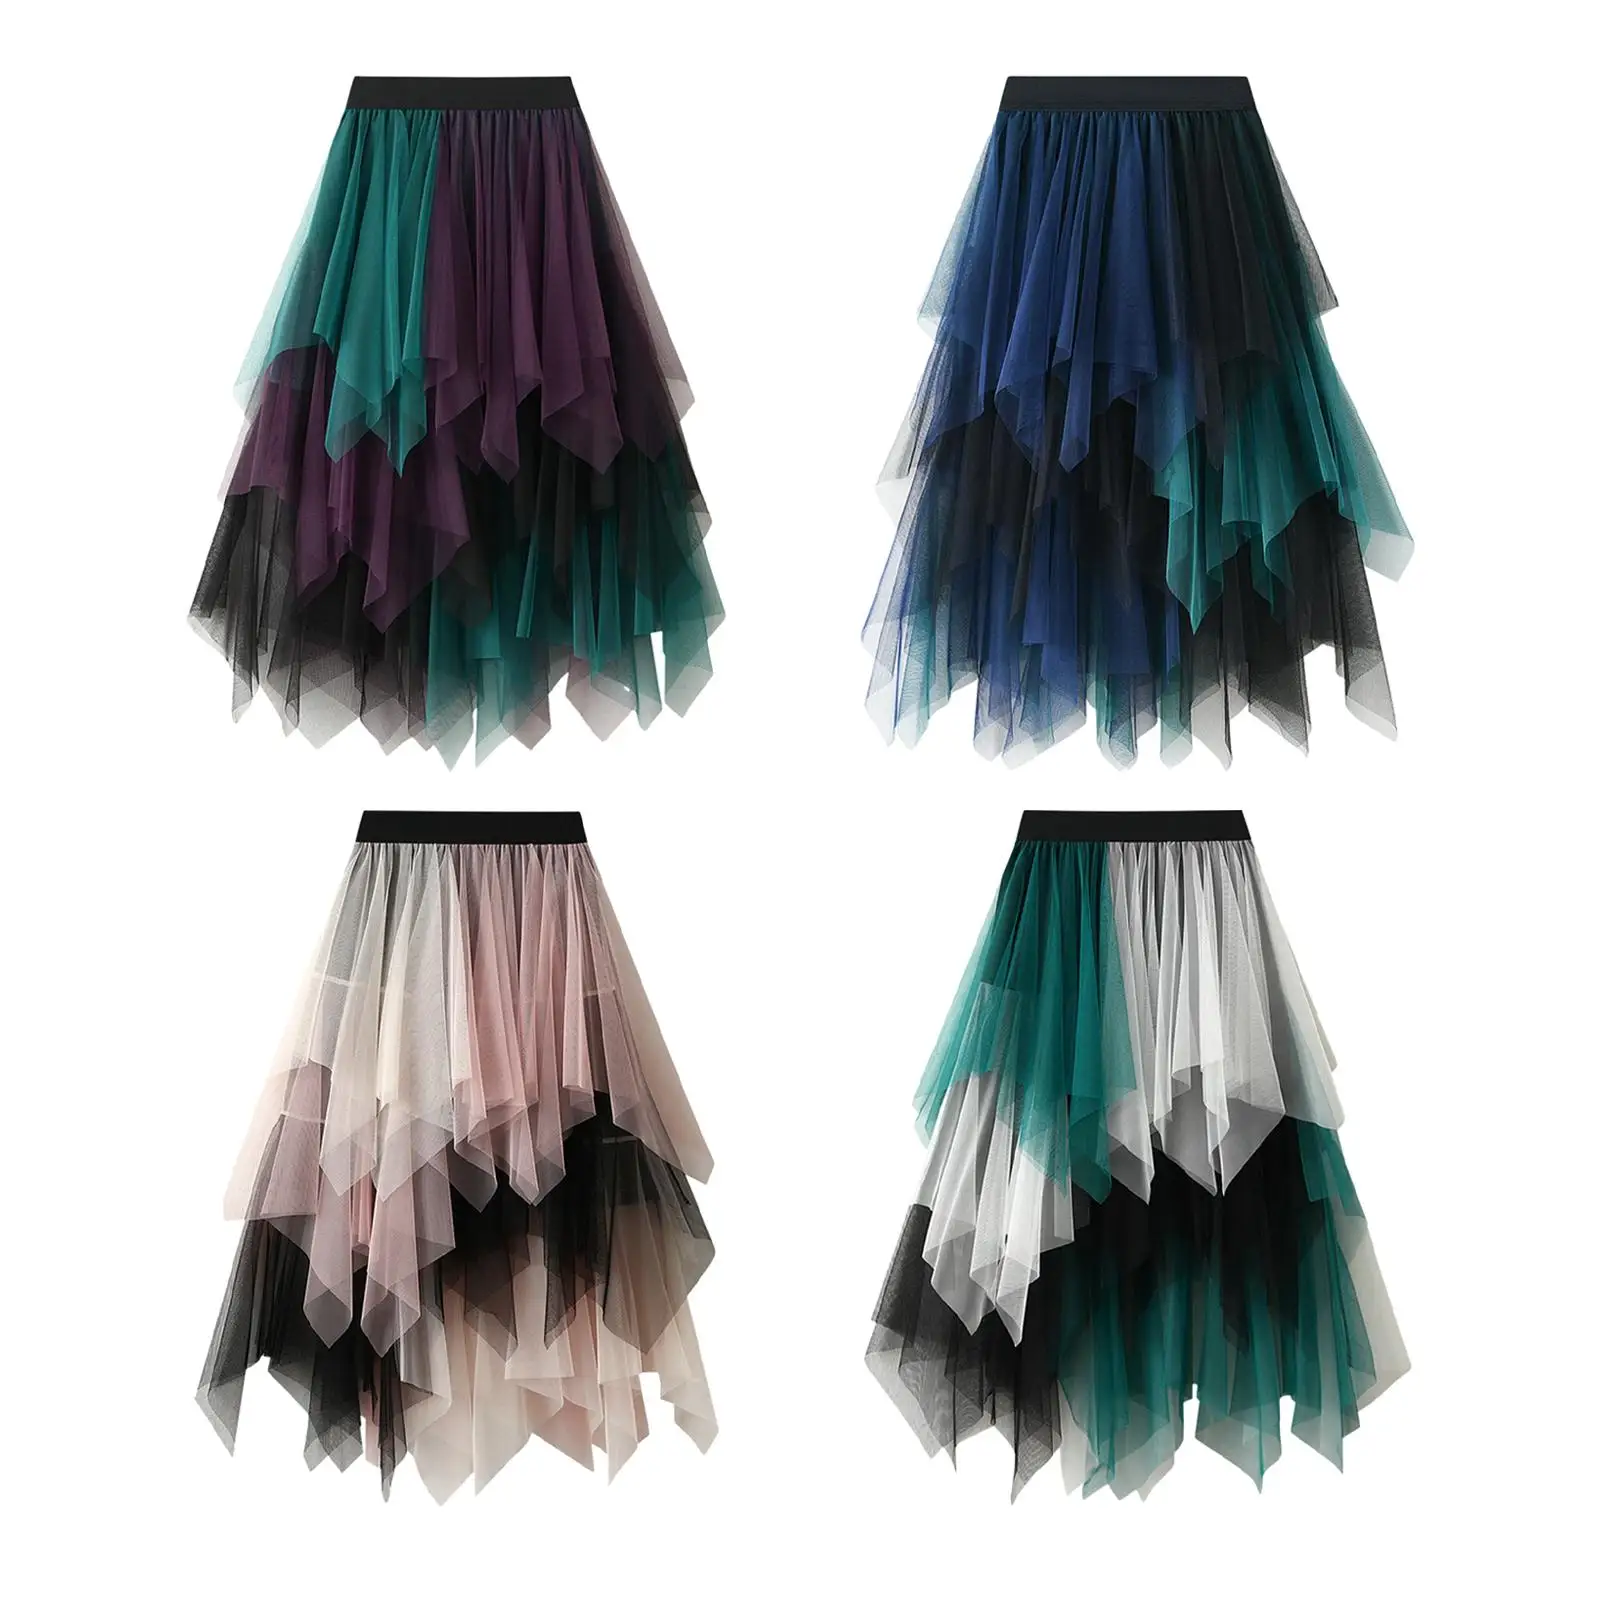 Tulle Skirts for Women Dress Asymmetrical Elastic High Waist Fairy Skirt for Stage Performance Halloween Prom Casual Daily Wear